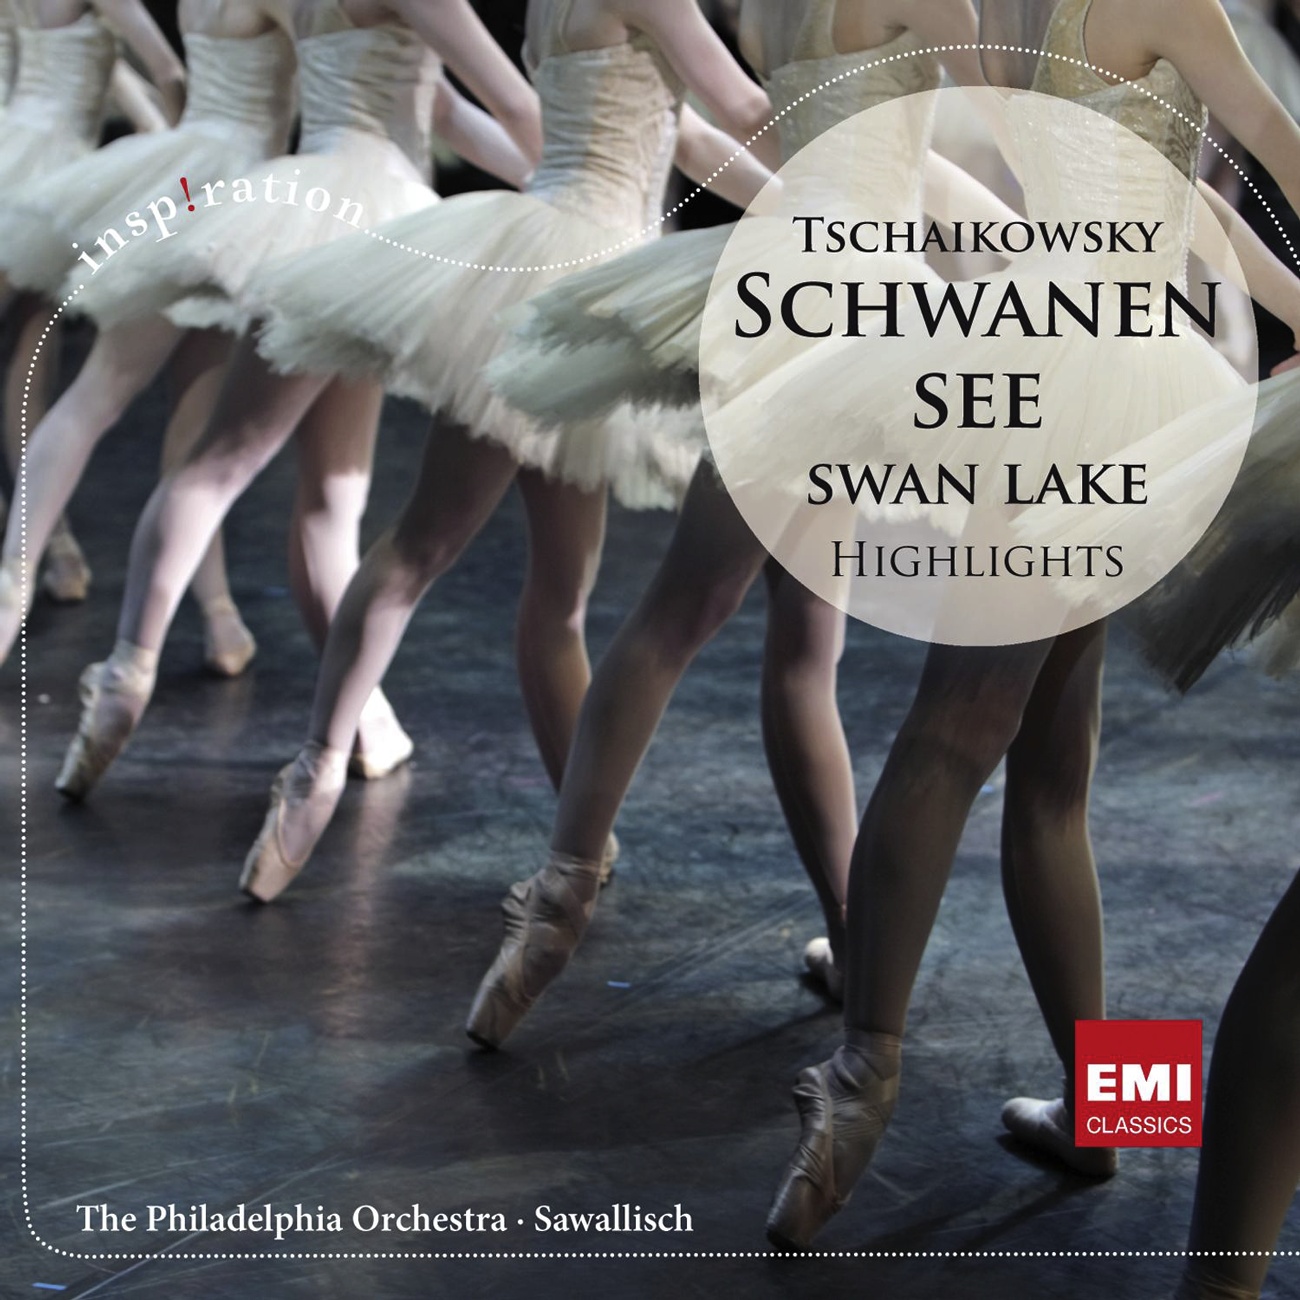 Swan Lake - Ballet in four acts Op. 20, ACT 2, No. 13 - Danses des cygnes: IV.    Allegro moderato